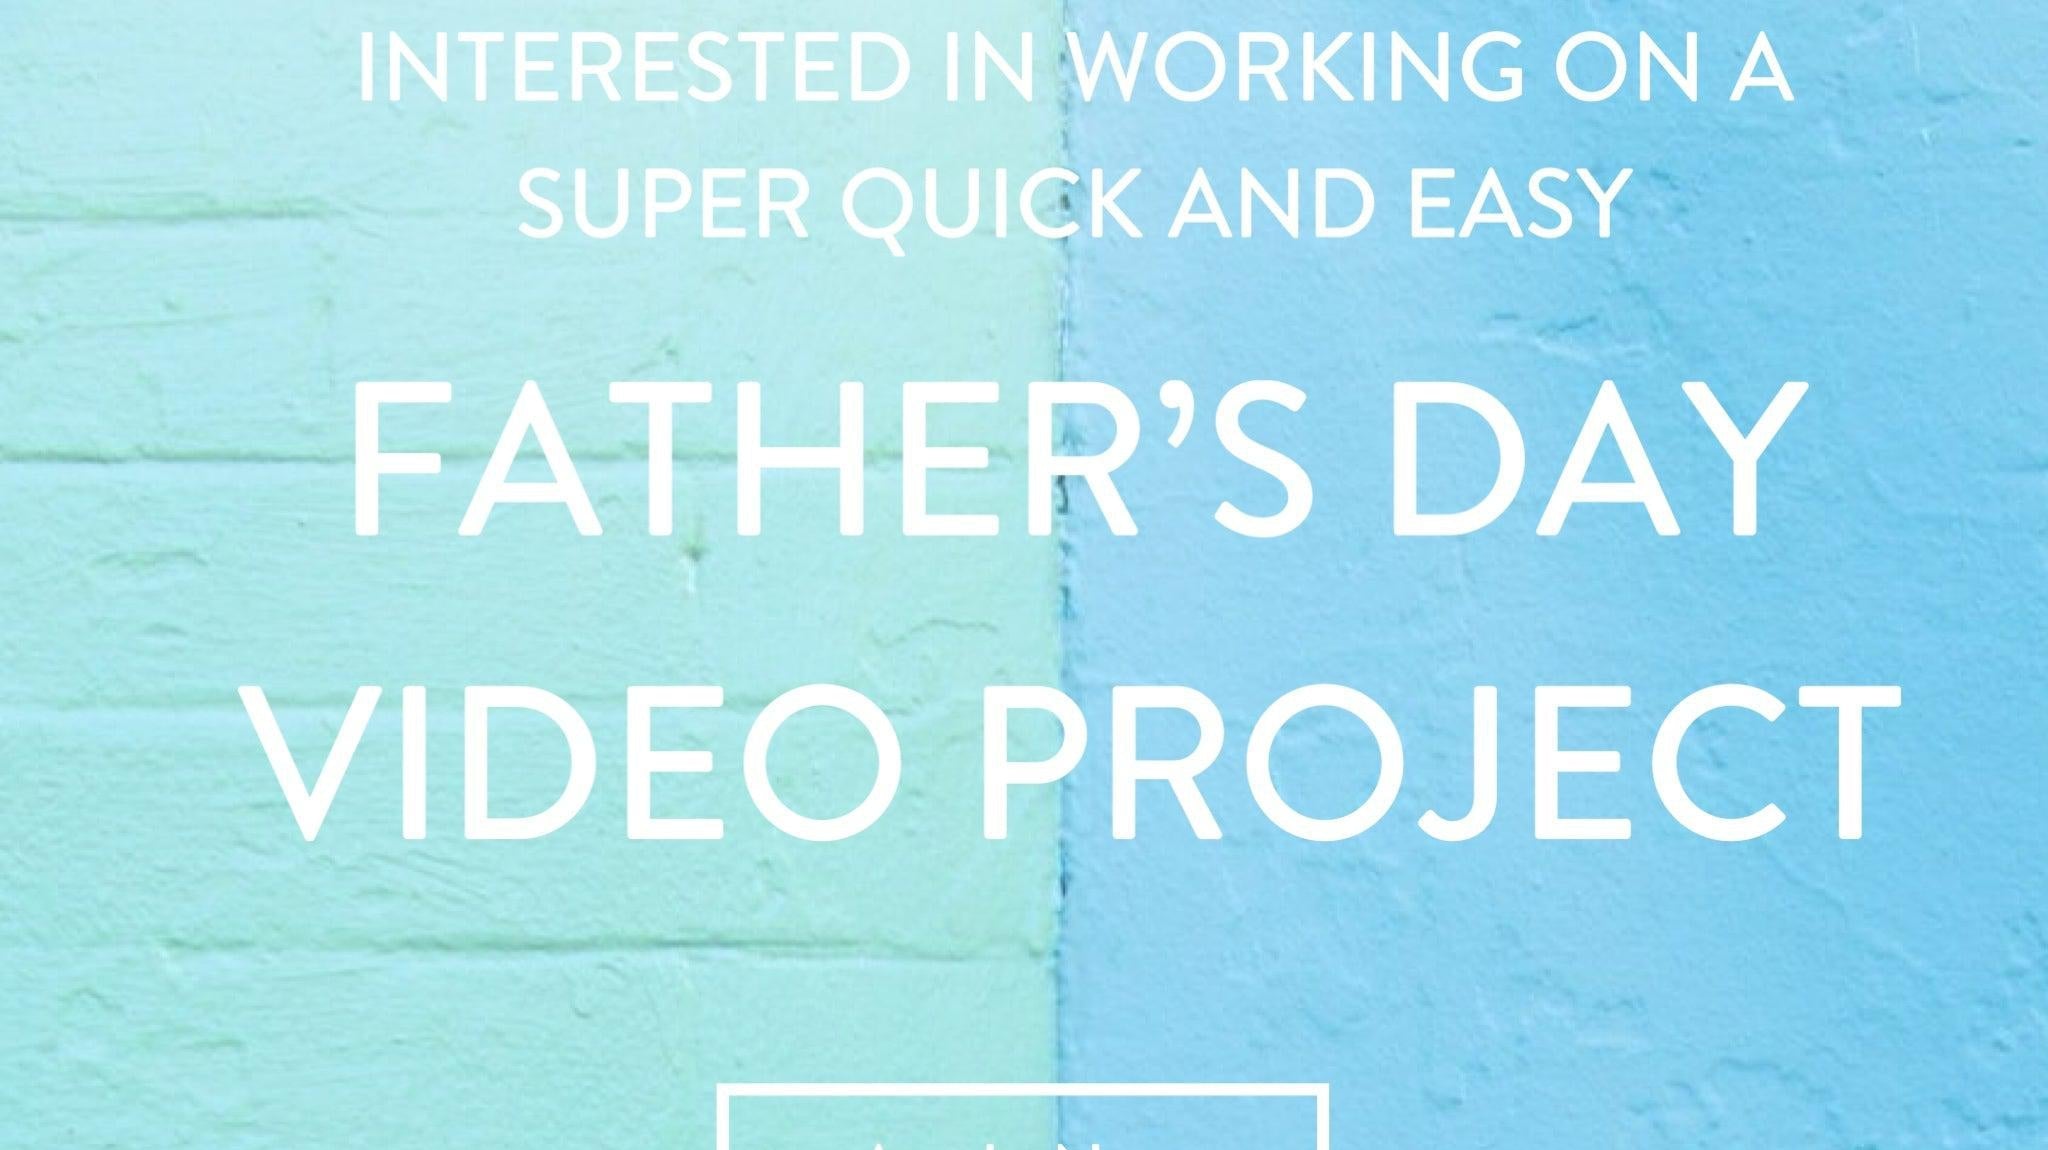 Father's Day Video Project-Portage and Main